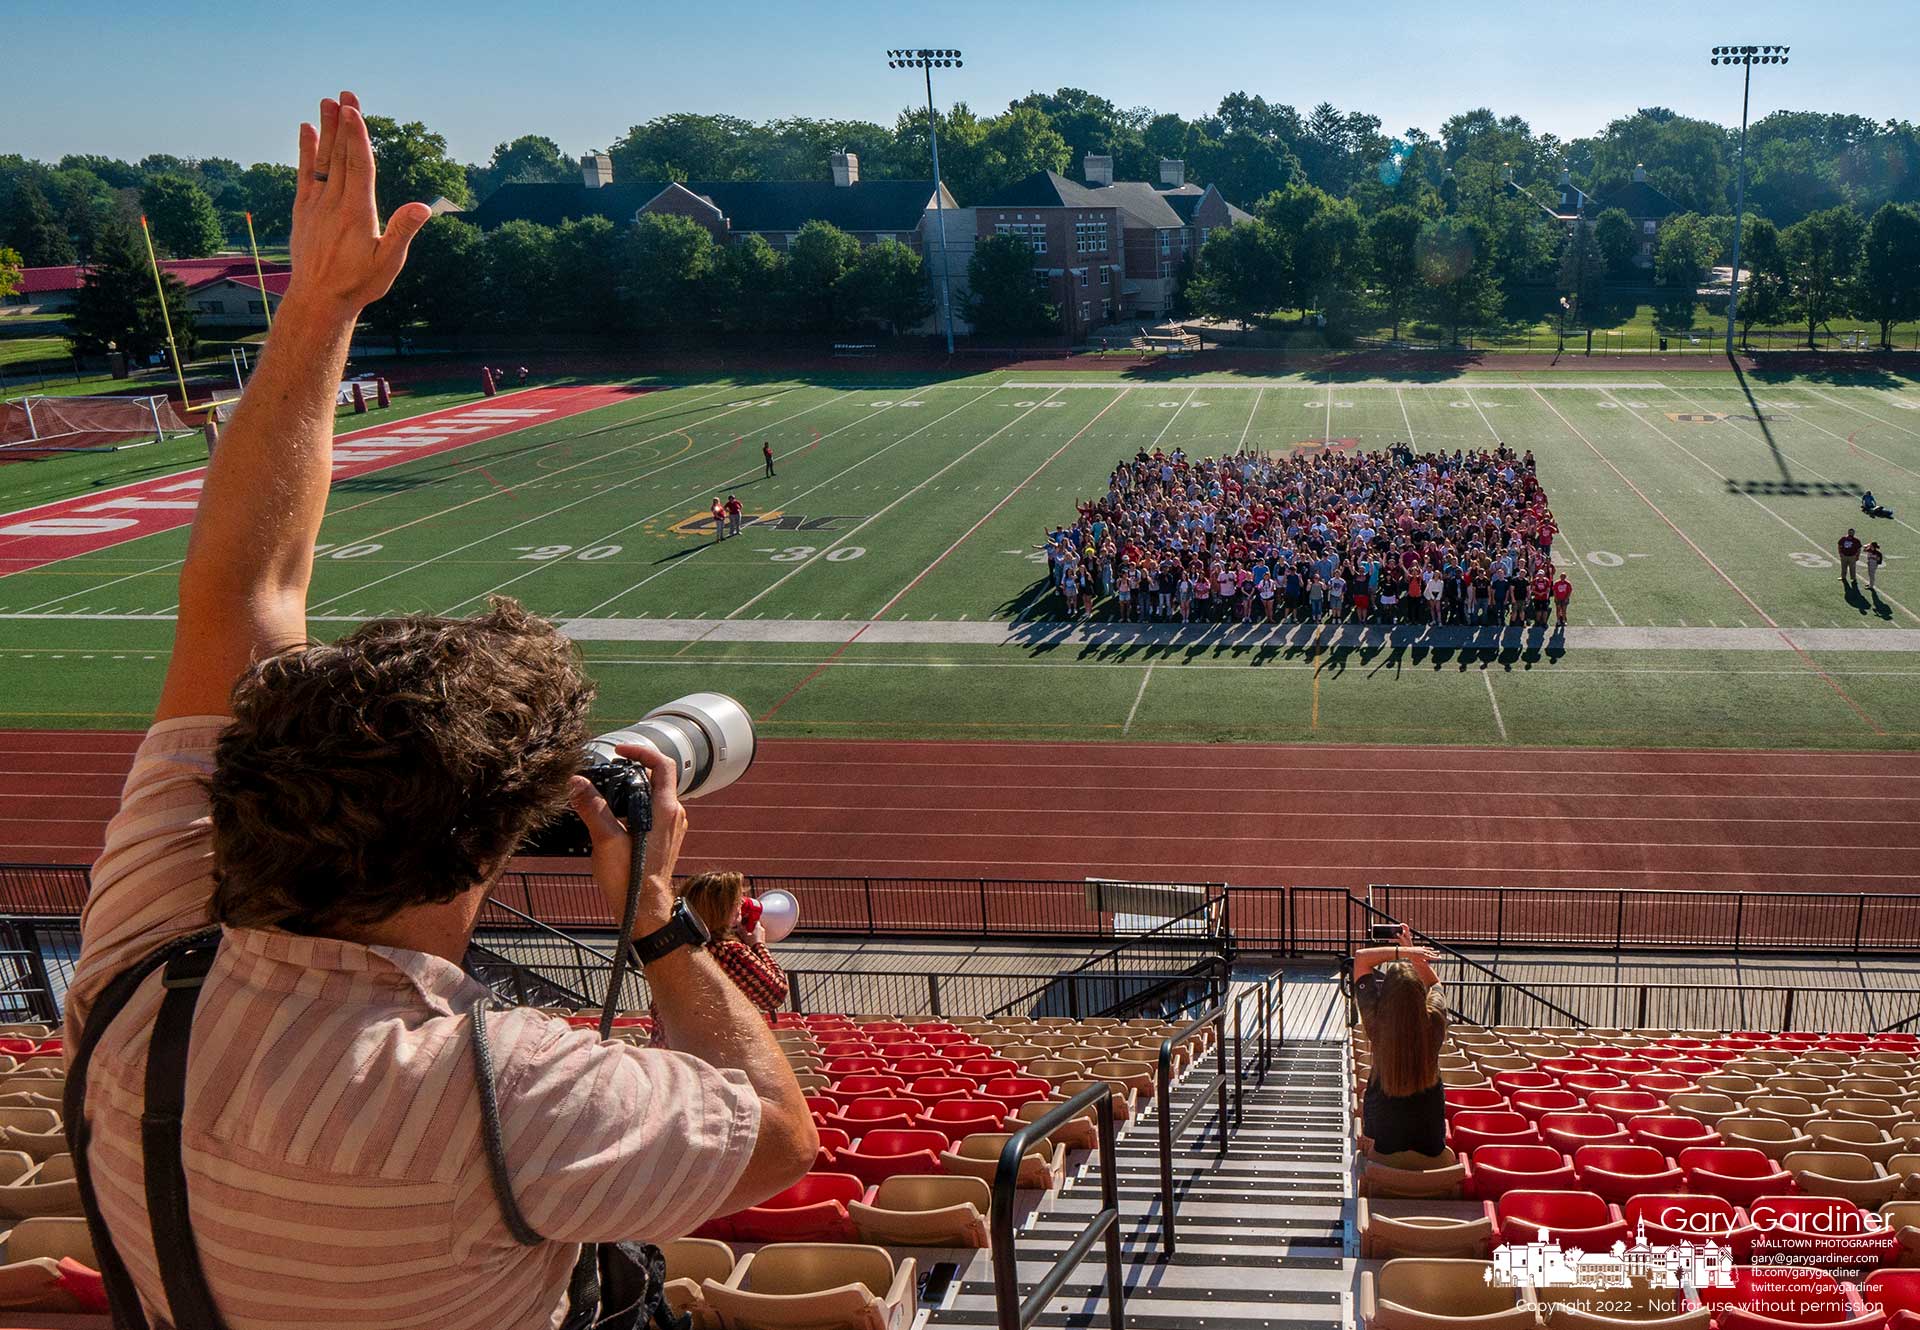 Photographer Jeffry Konzal signals the Otterbein University freshman class posing for the first class photo taken at the university's football stadium. This week is freshman orientation week with classes starting Monday. My Final Photo for August 18, 2022.